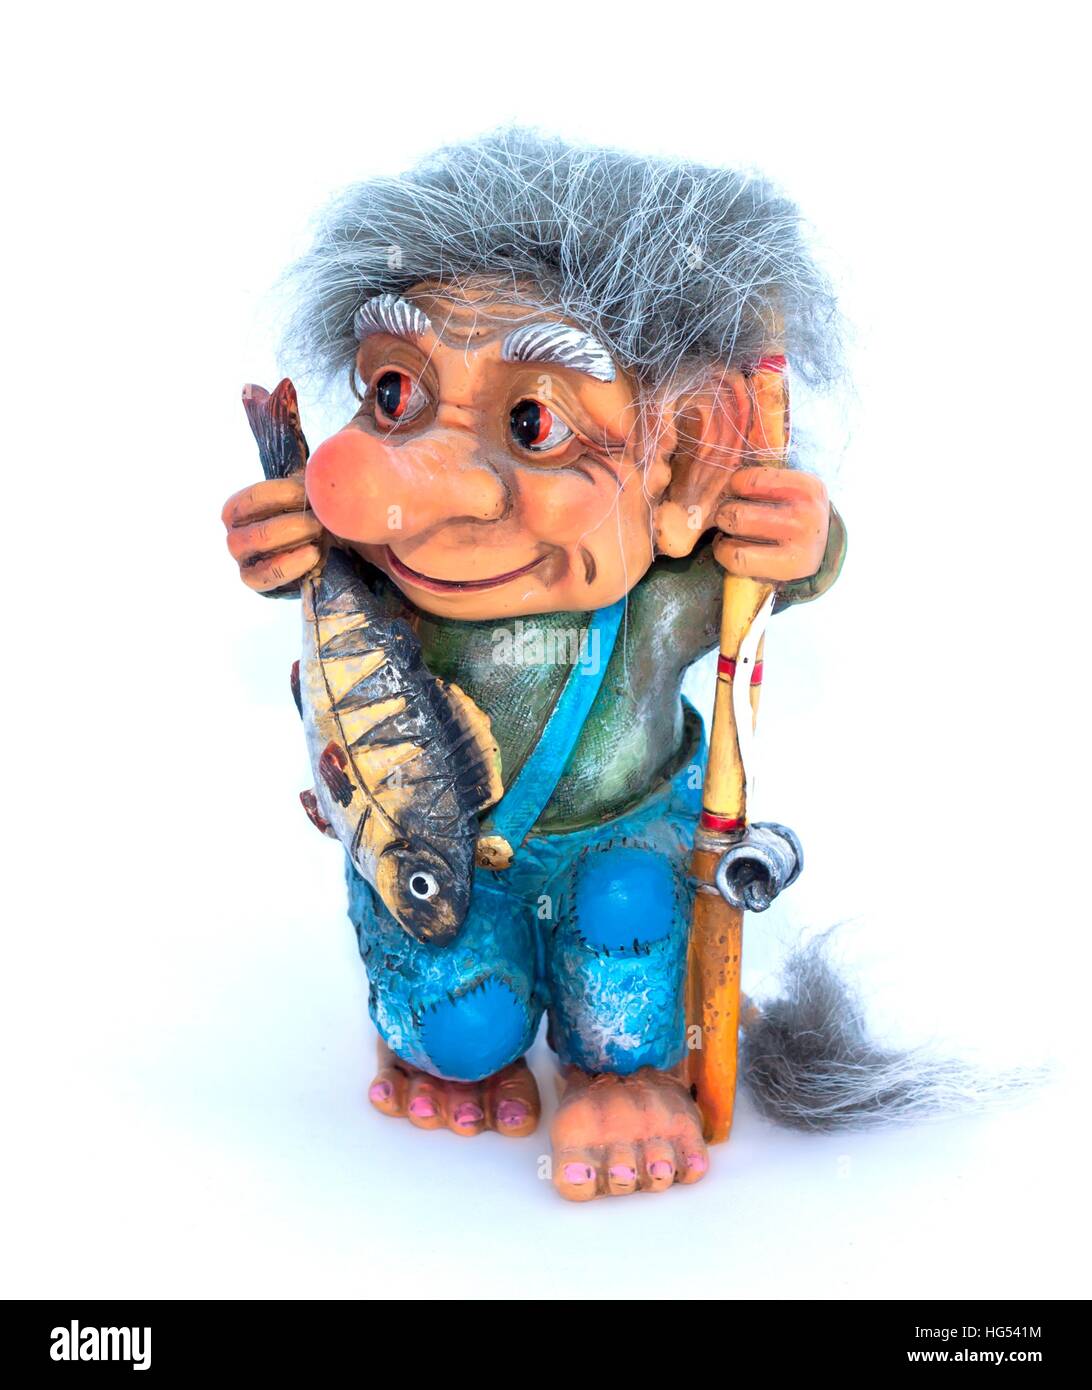 Fisher troll with fishing rod and fish figurine on a white